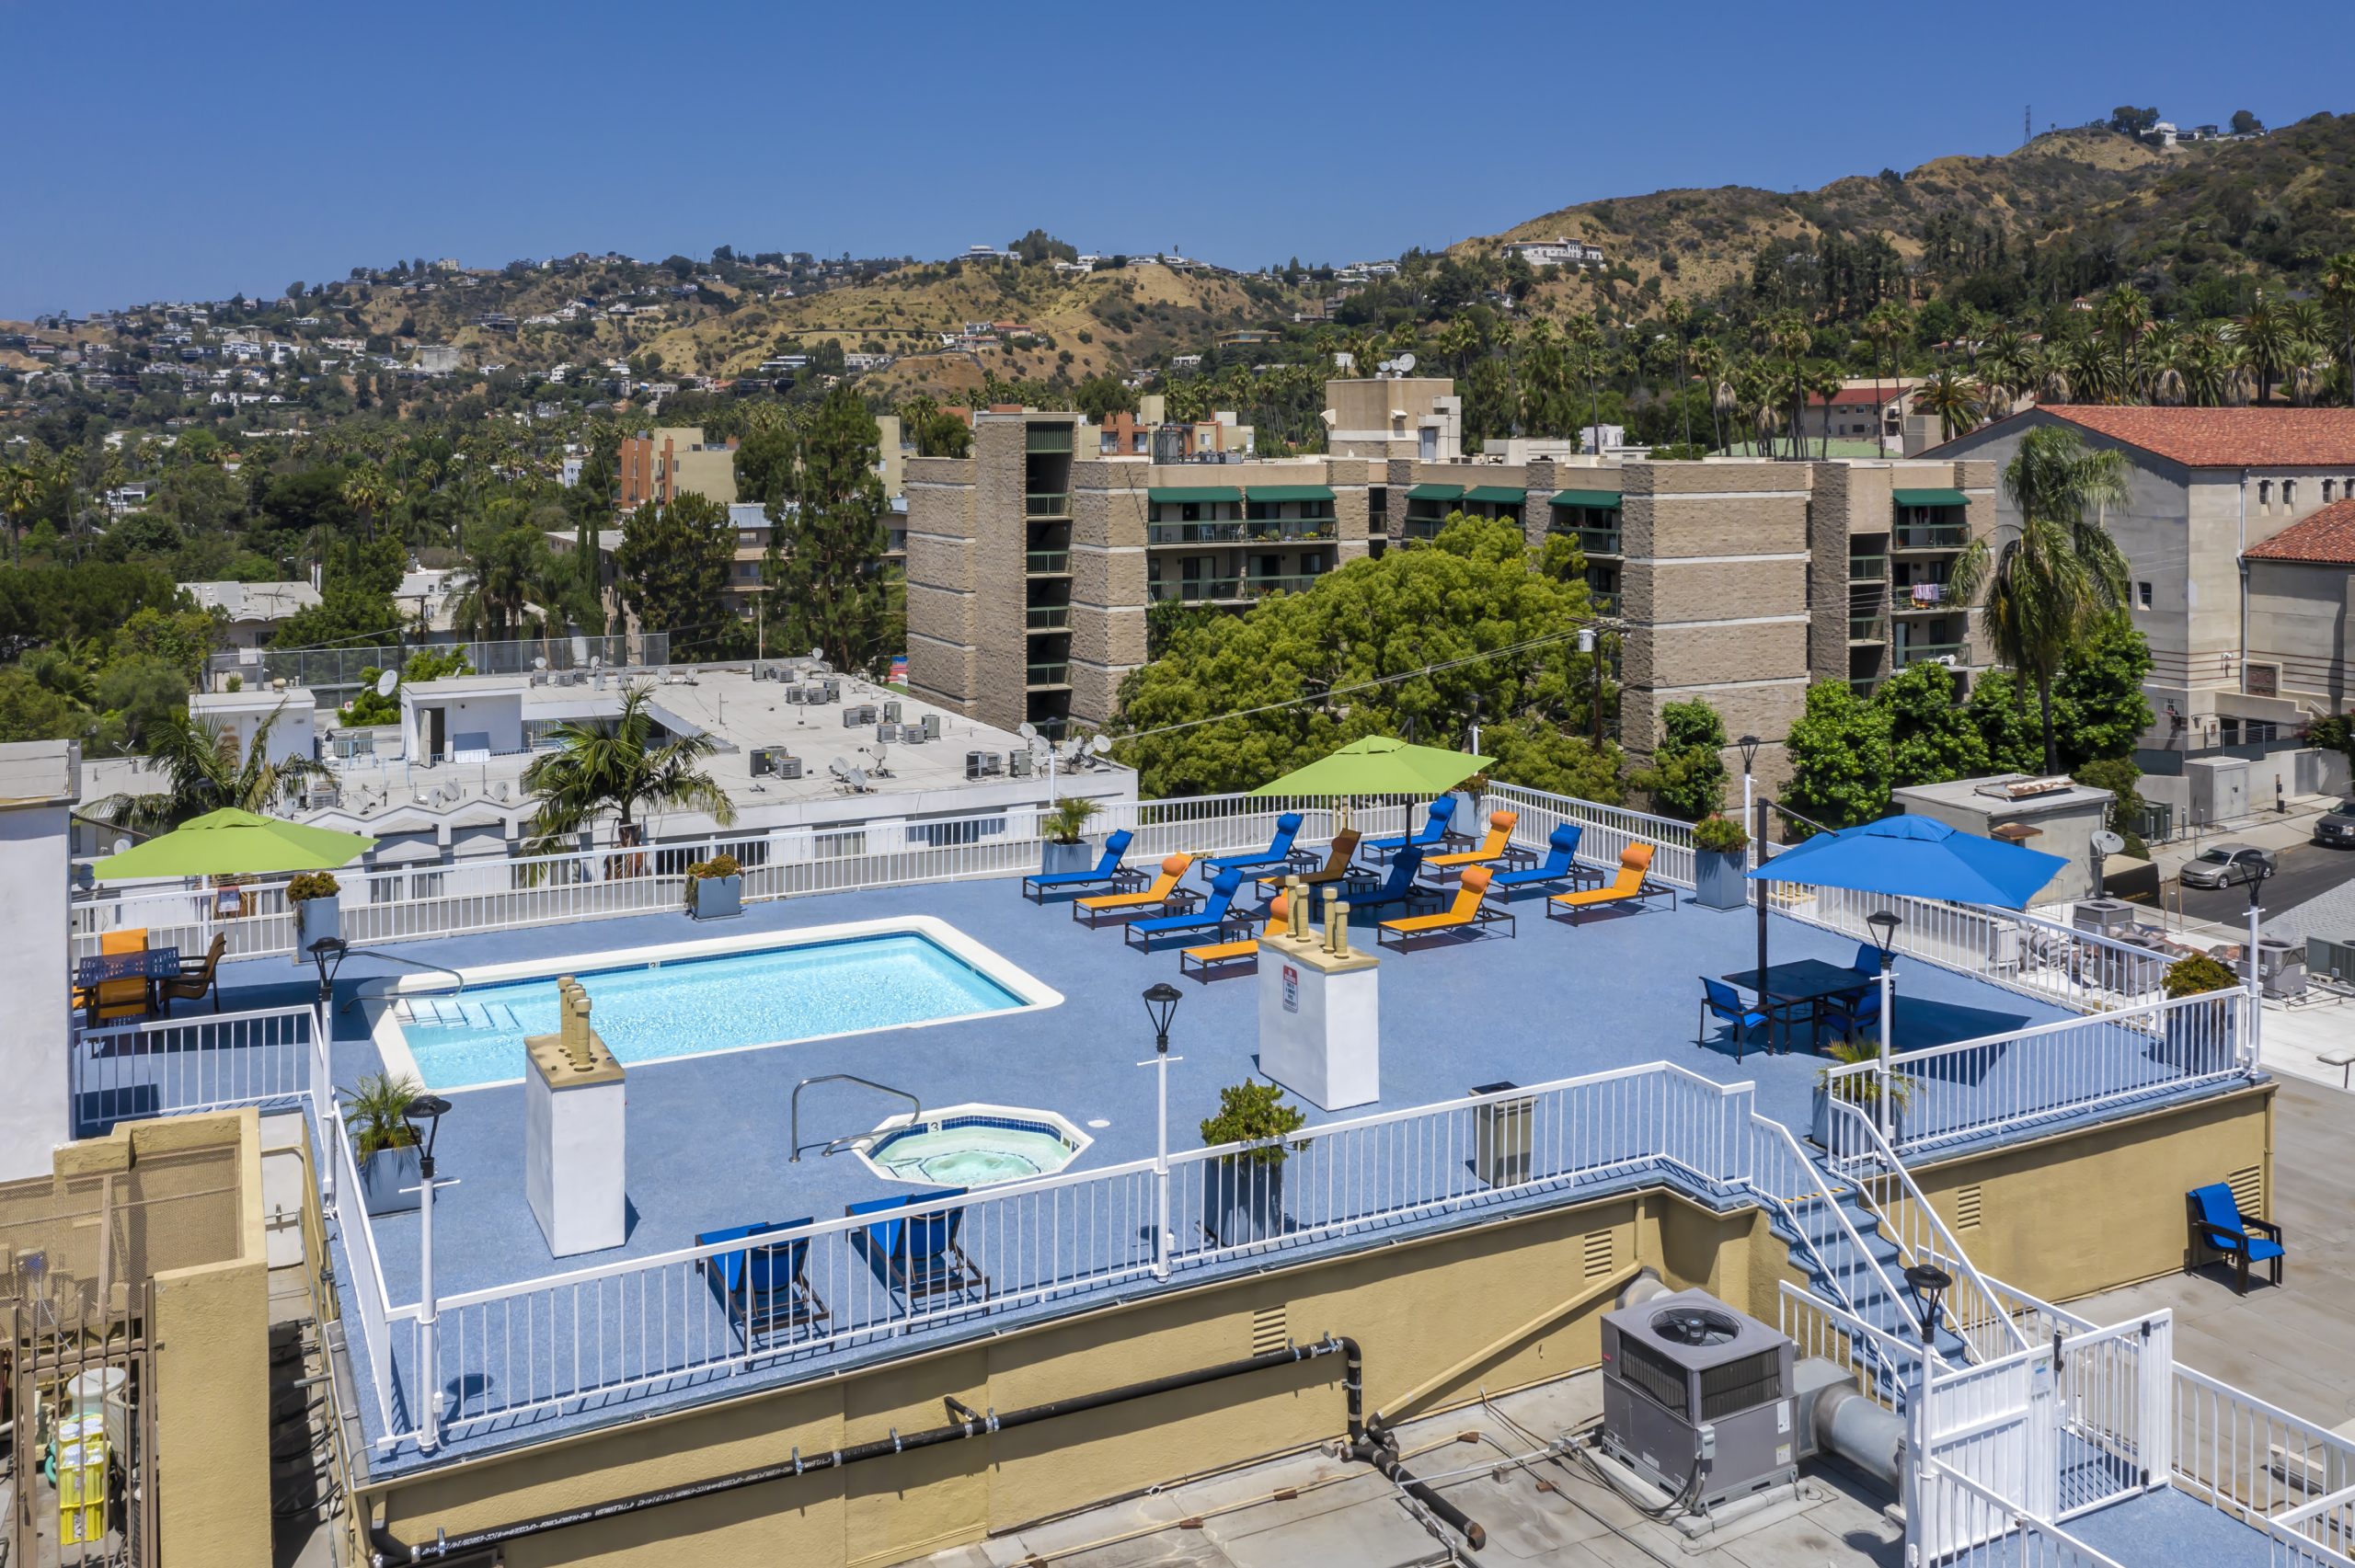 A rooftop pool with lounge chairs offering breathtaking views of the Hollywood hills.